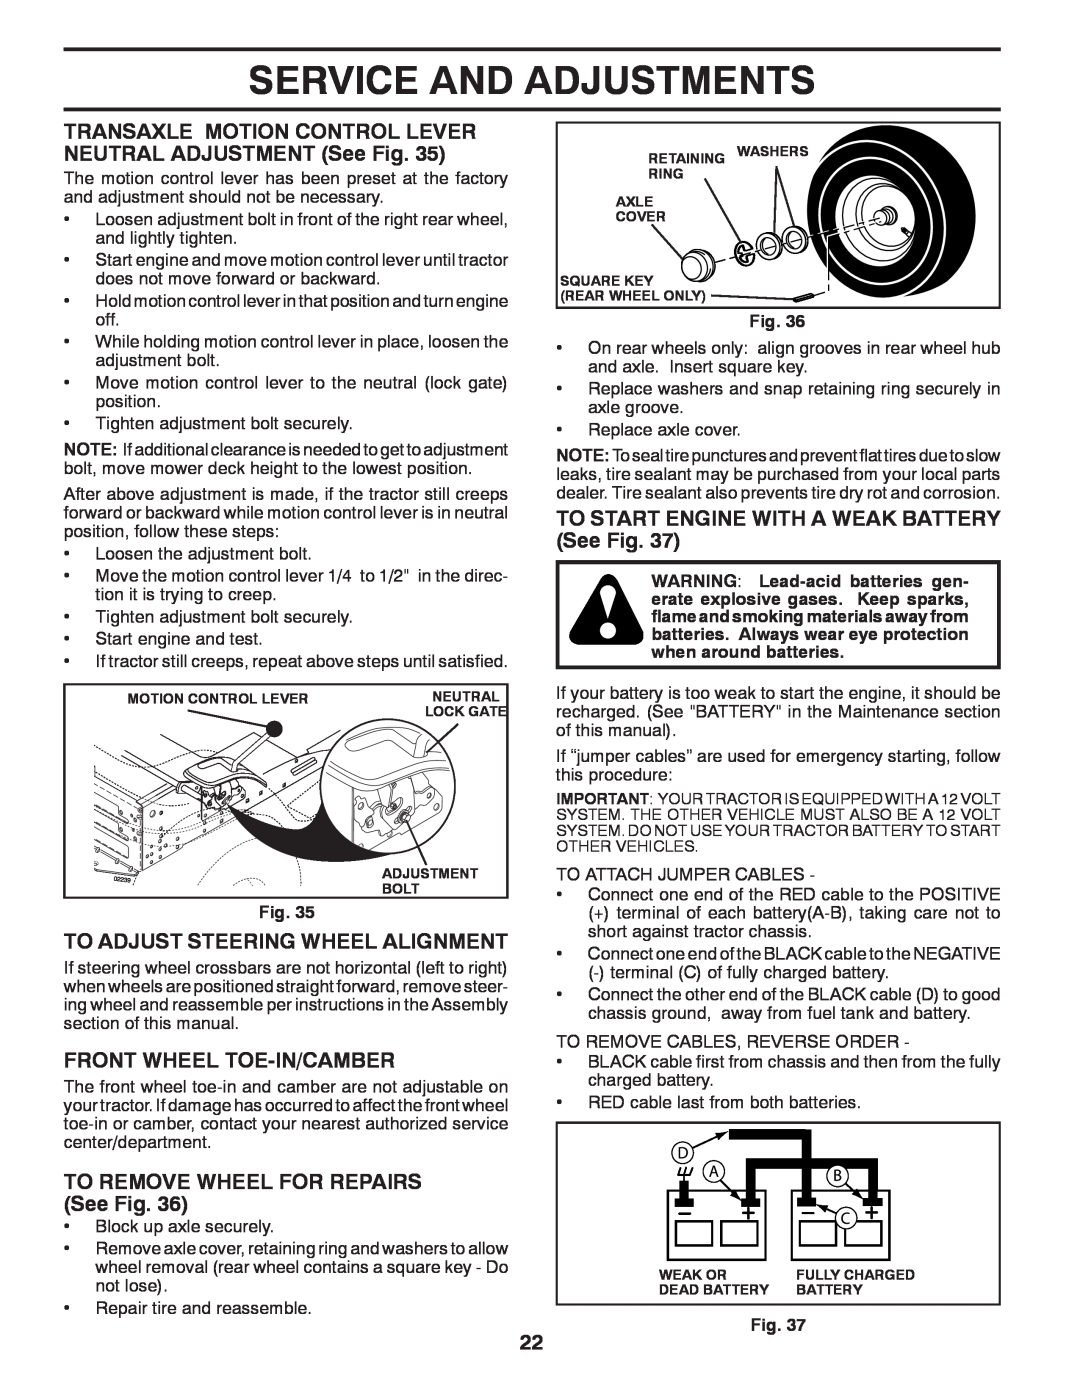 Poulan 430094 Service And Adjustments, TO START ENGINE WITH A WEAK BATTERY See Fig, To Adjust Steering Wheel Alignment 